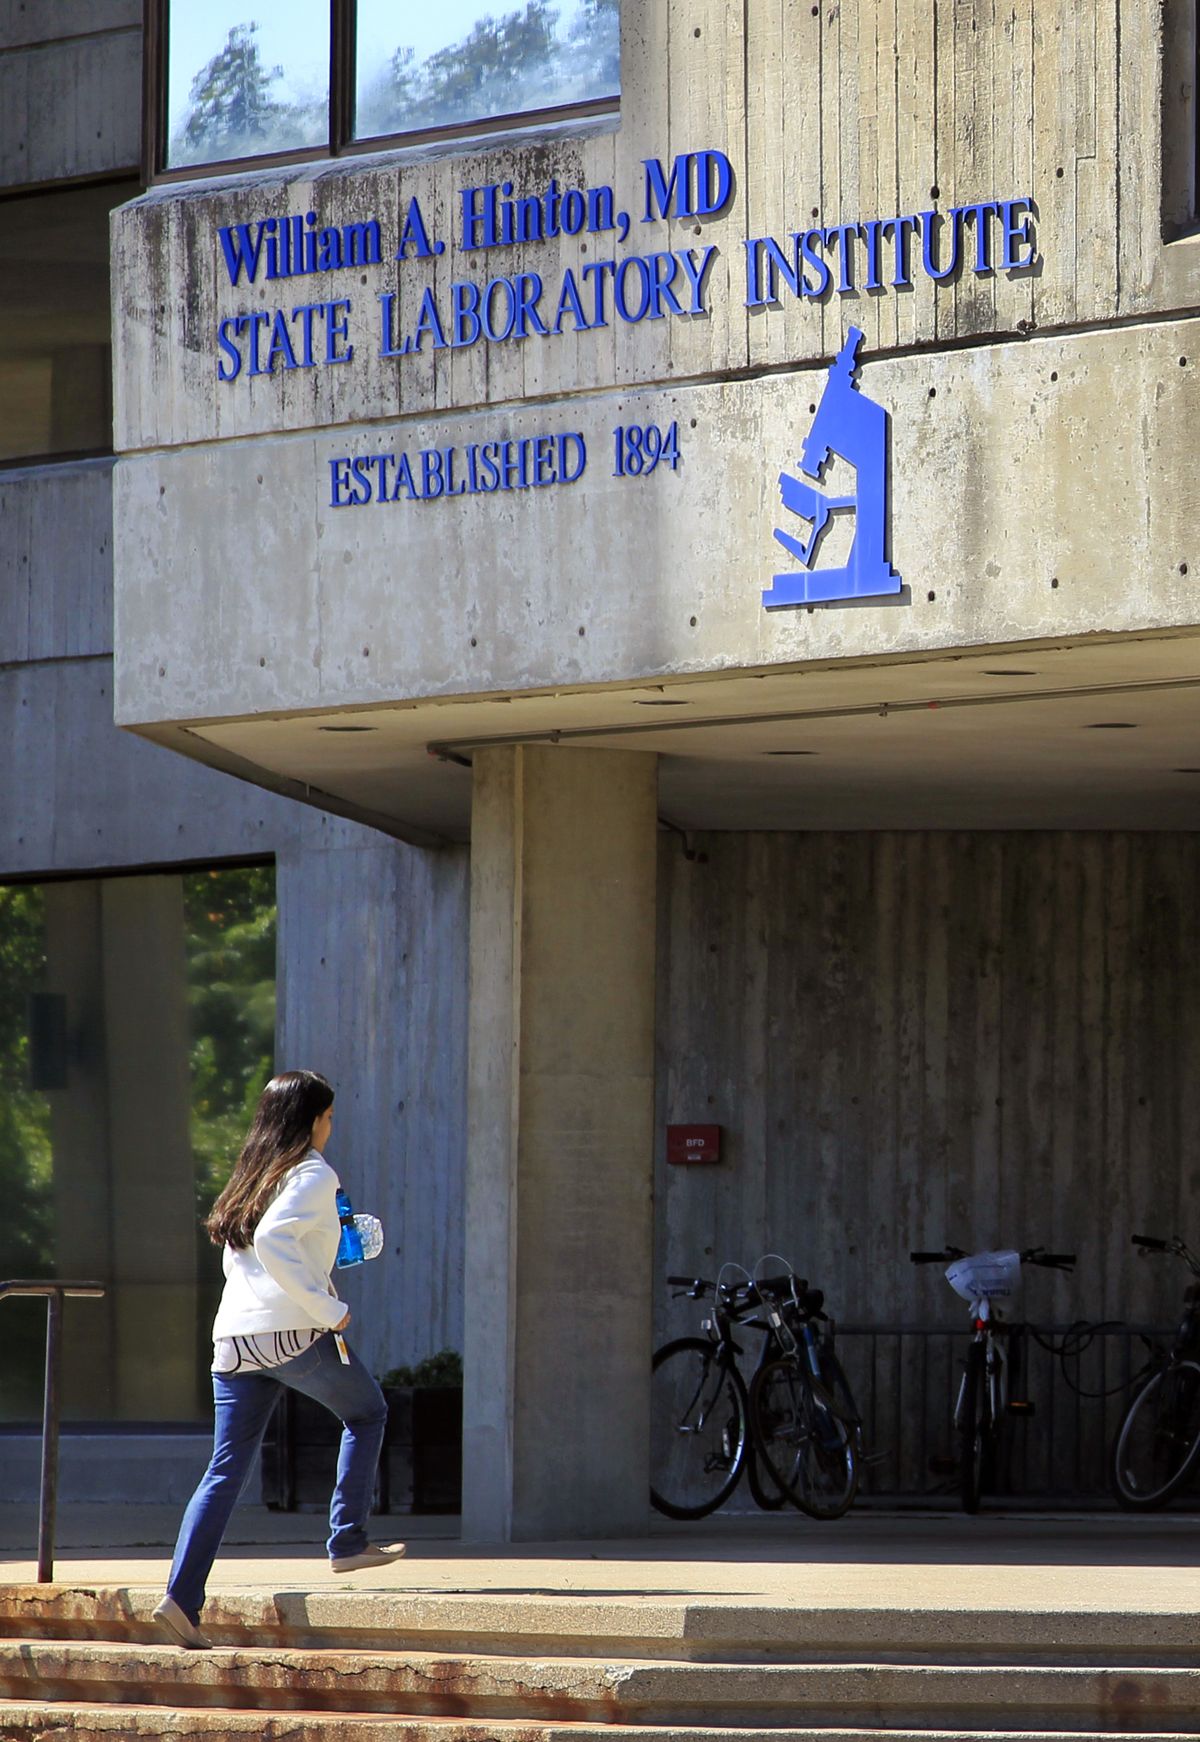 A woman enters the William A. Hinton State Laboratory Institute, which houses the Massachusetts state drug lab, in the Jamaica Plain neighborhood of Boston, Thursday, Sept. 27, 2012. Documents revealed Wednesday that a crime lab chemist, whose work has thrown thousands of prosecutions into question, spend years faking results. (Steven Senne / Associated Press)